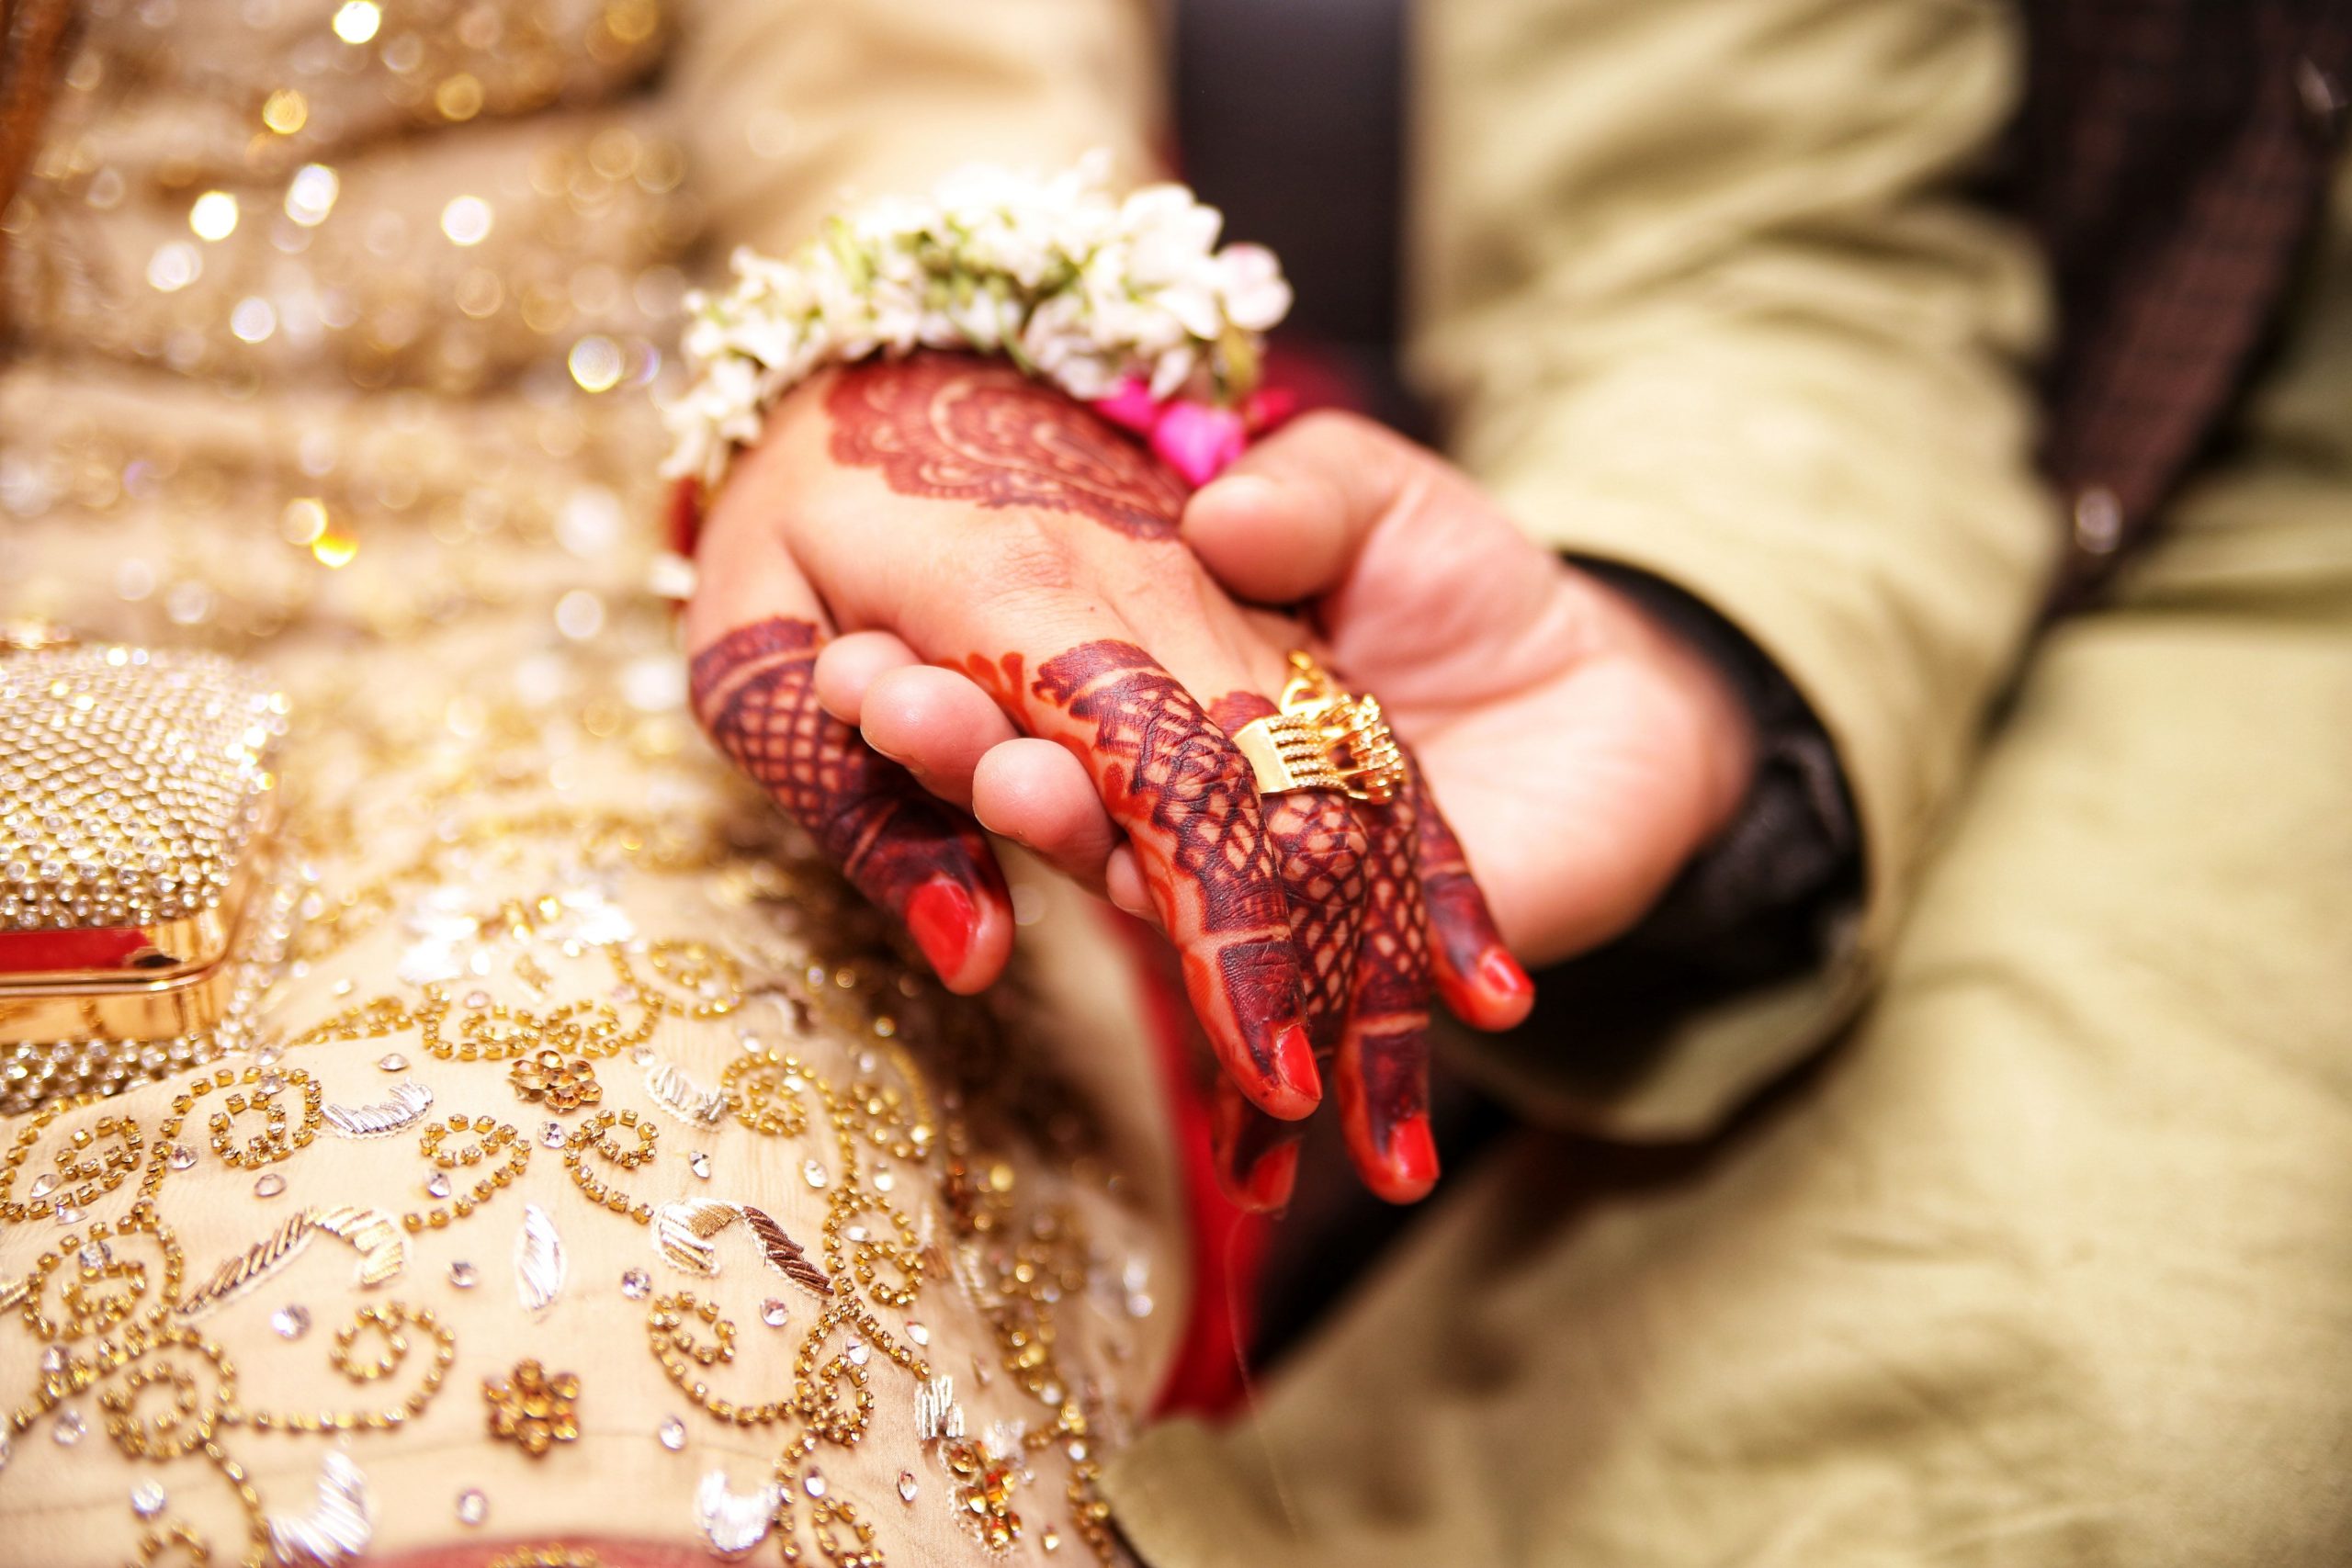 Legal age of marriage for women raised: Reasons and Results explained